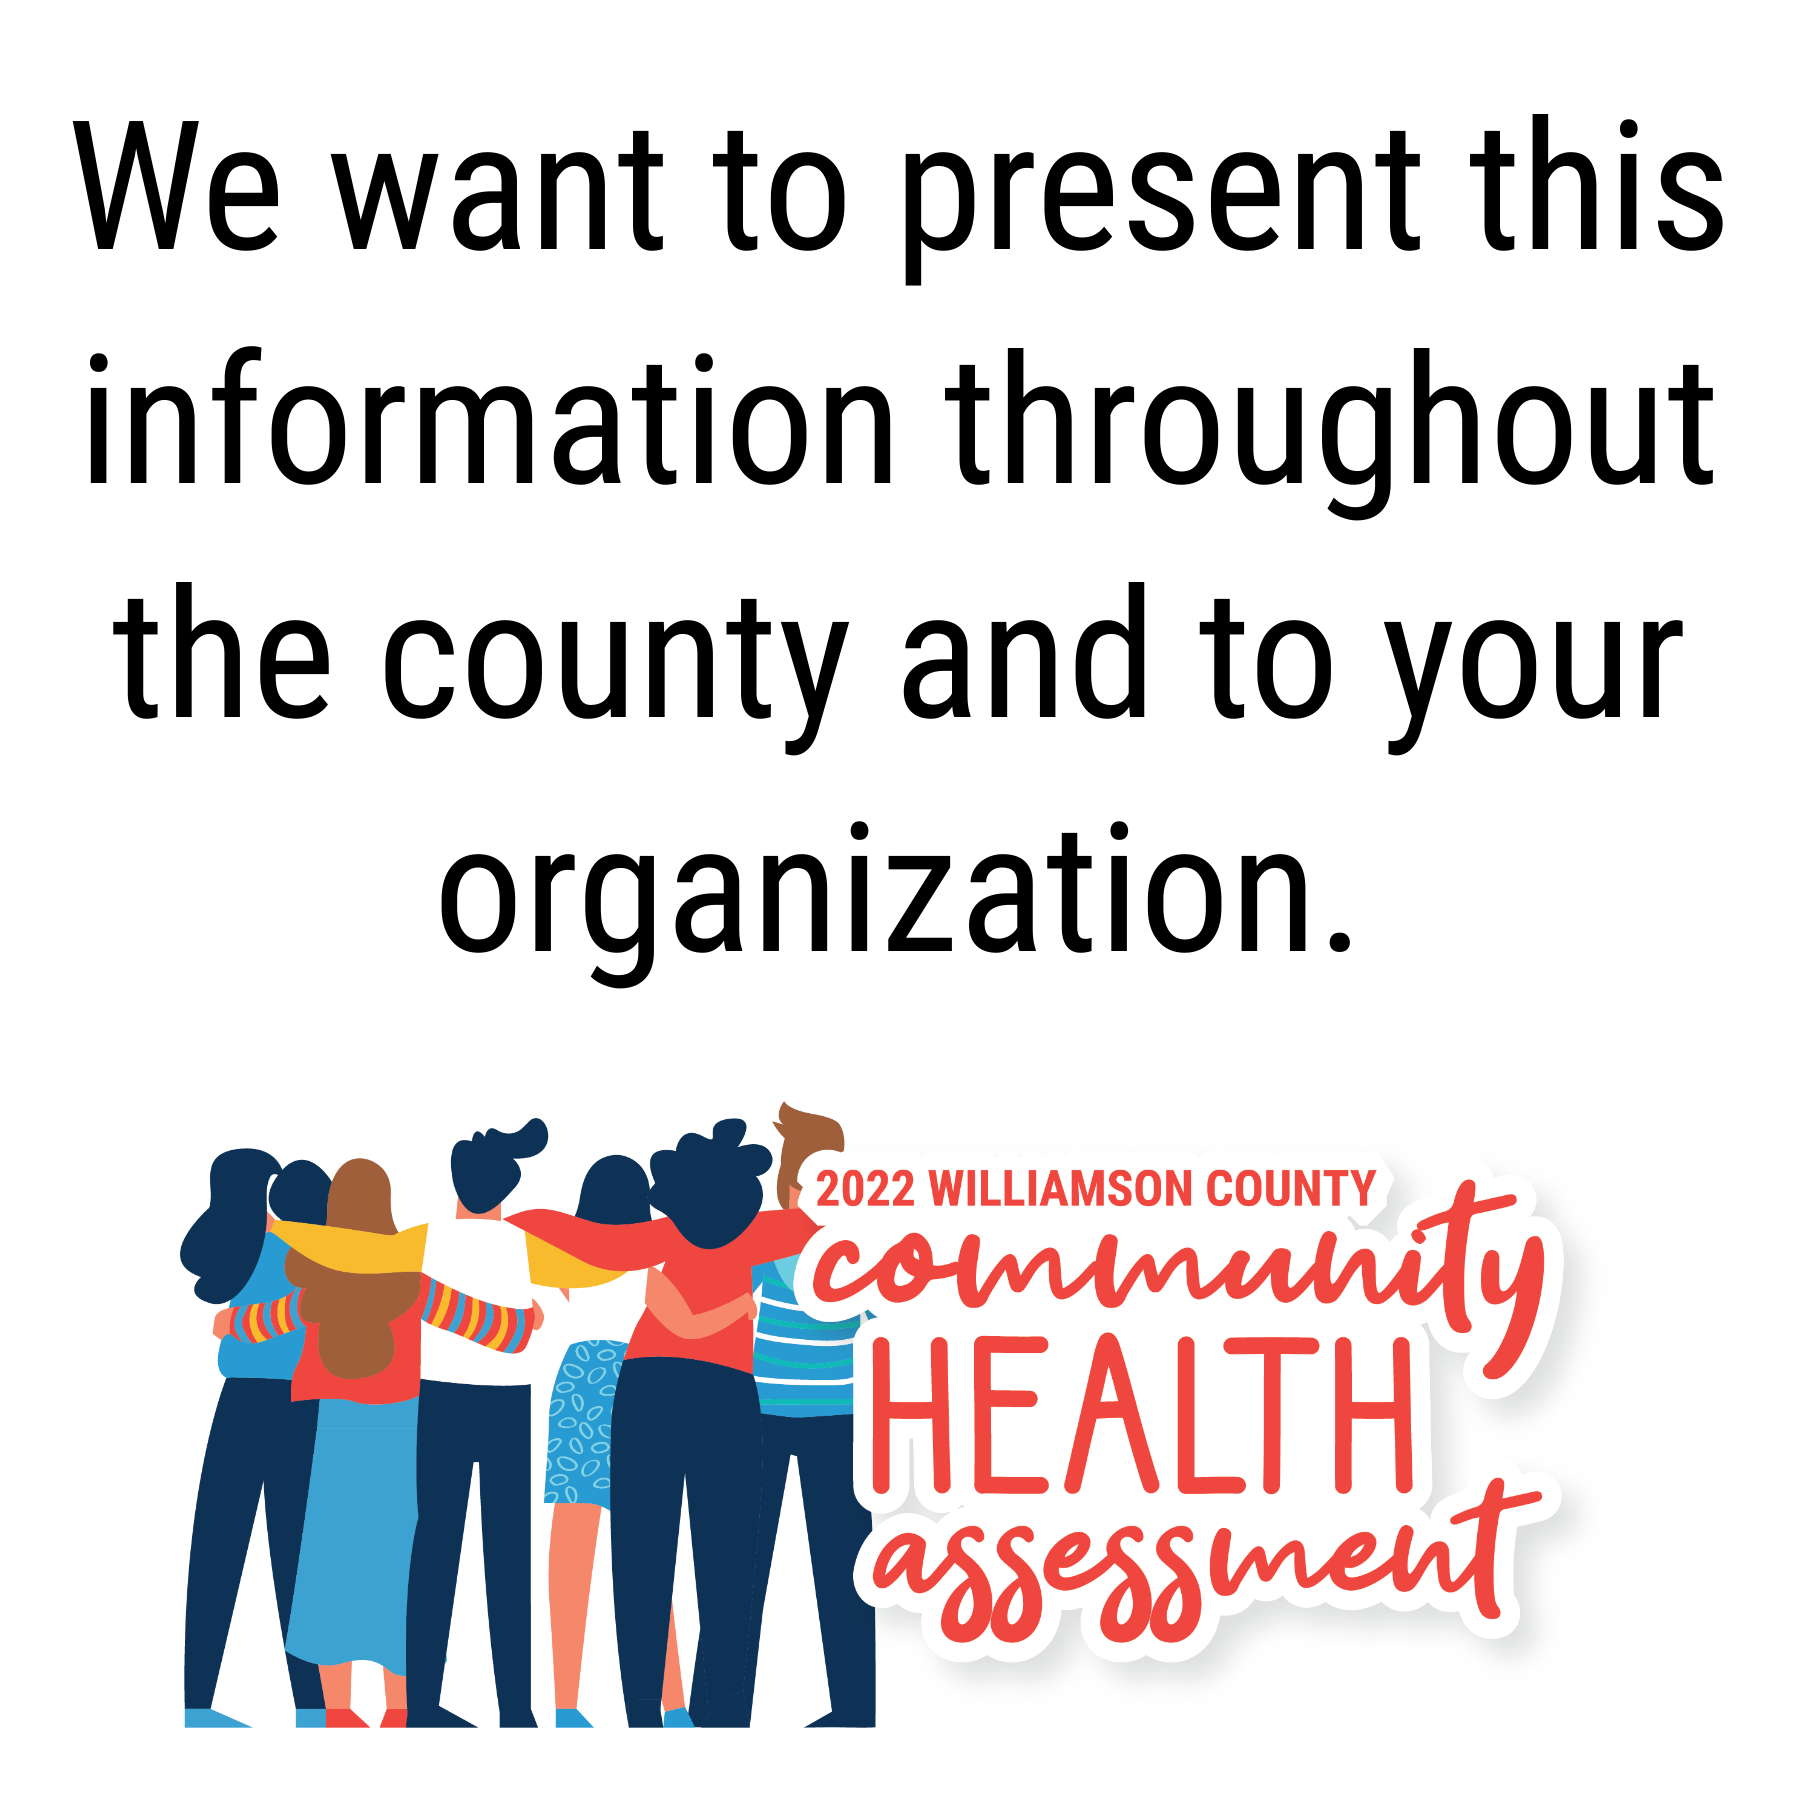 We want to present this information throughout the county and to your organization. 2022 Williamson County Community Health Assessment